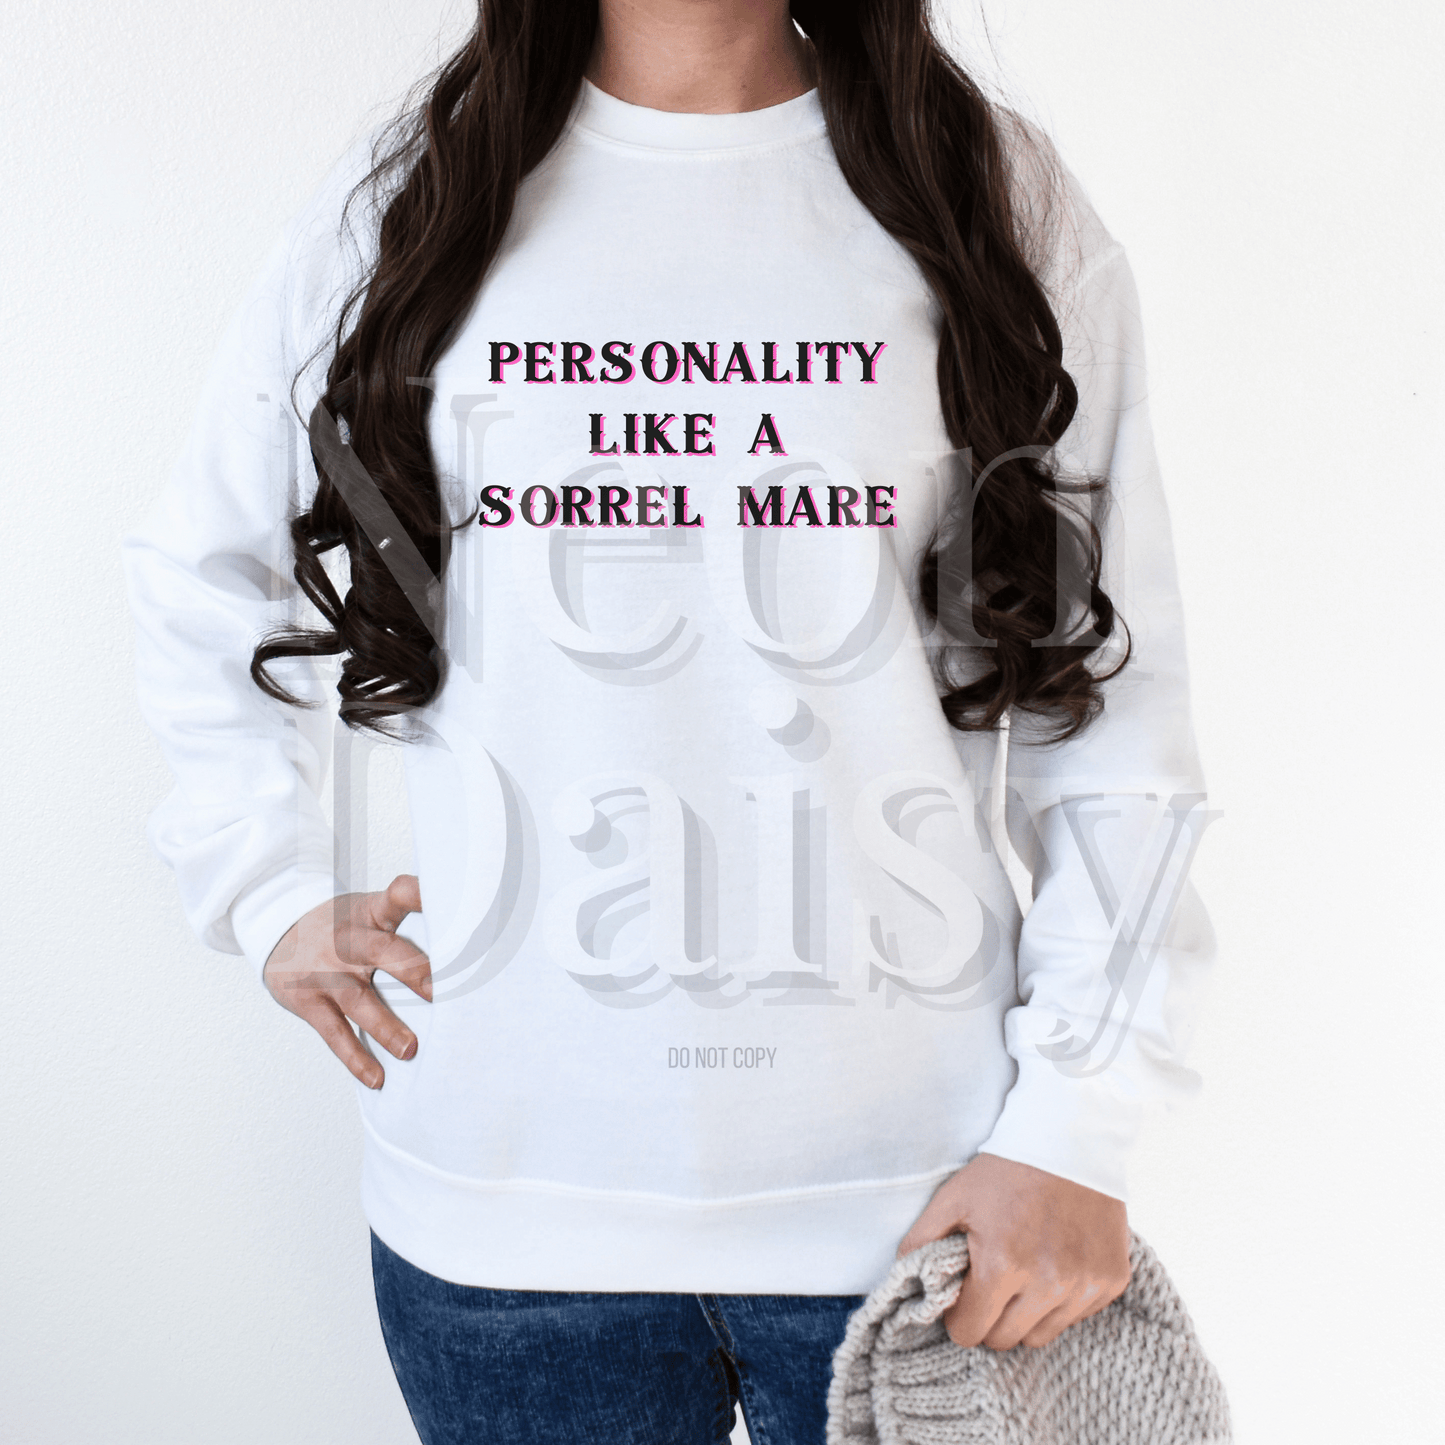 Personality Like A Sorrel Mare // CREWNECK or HOODIES